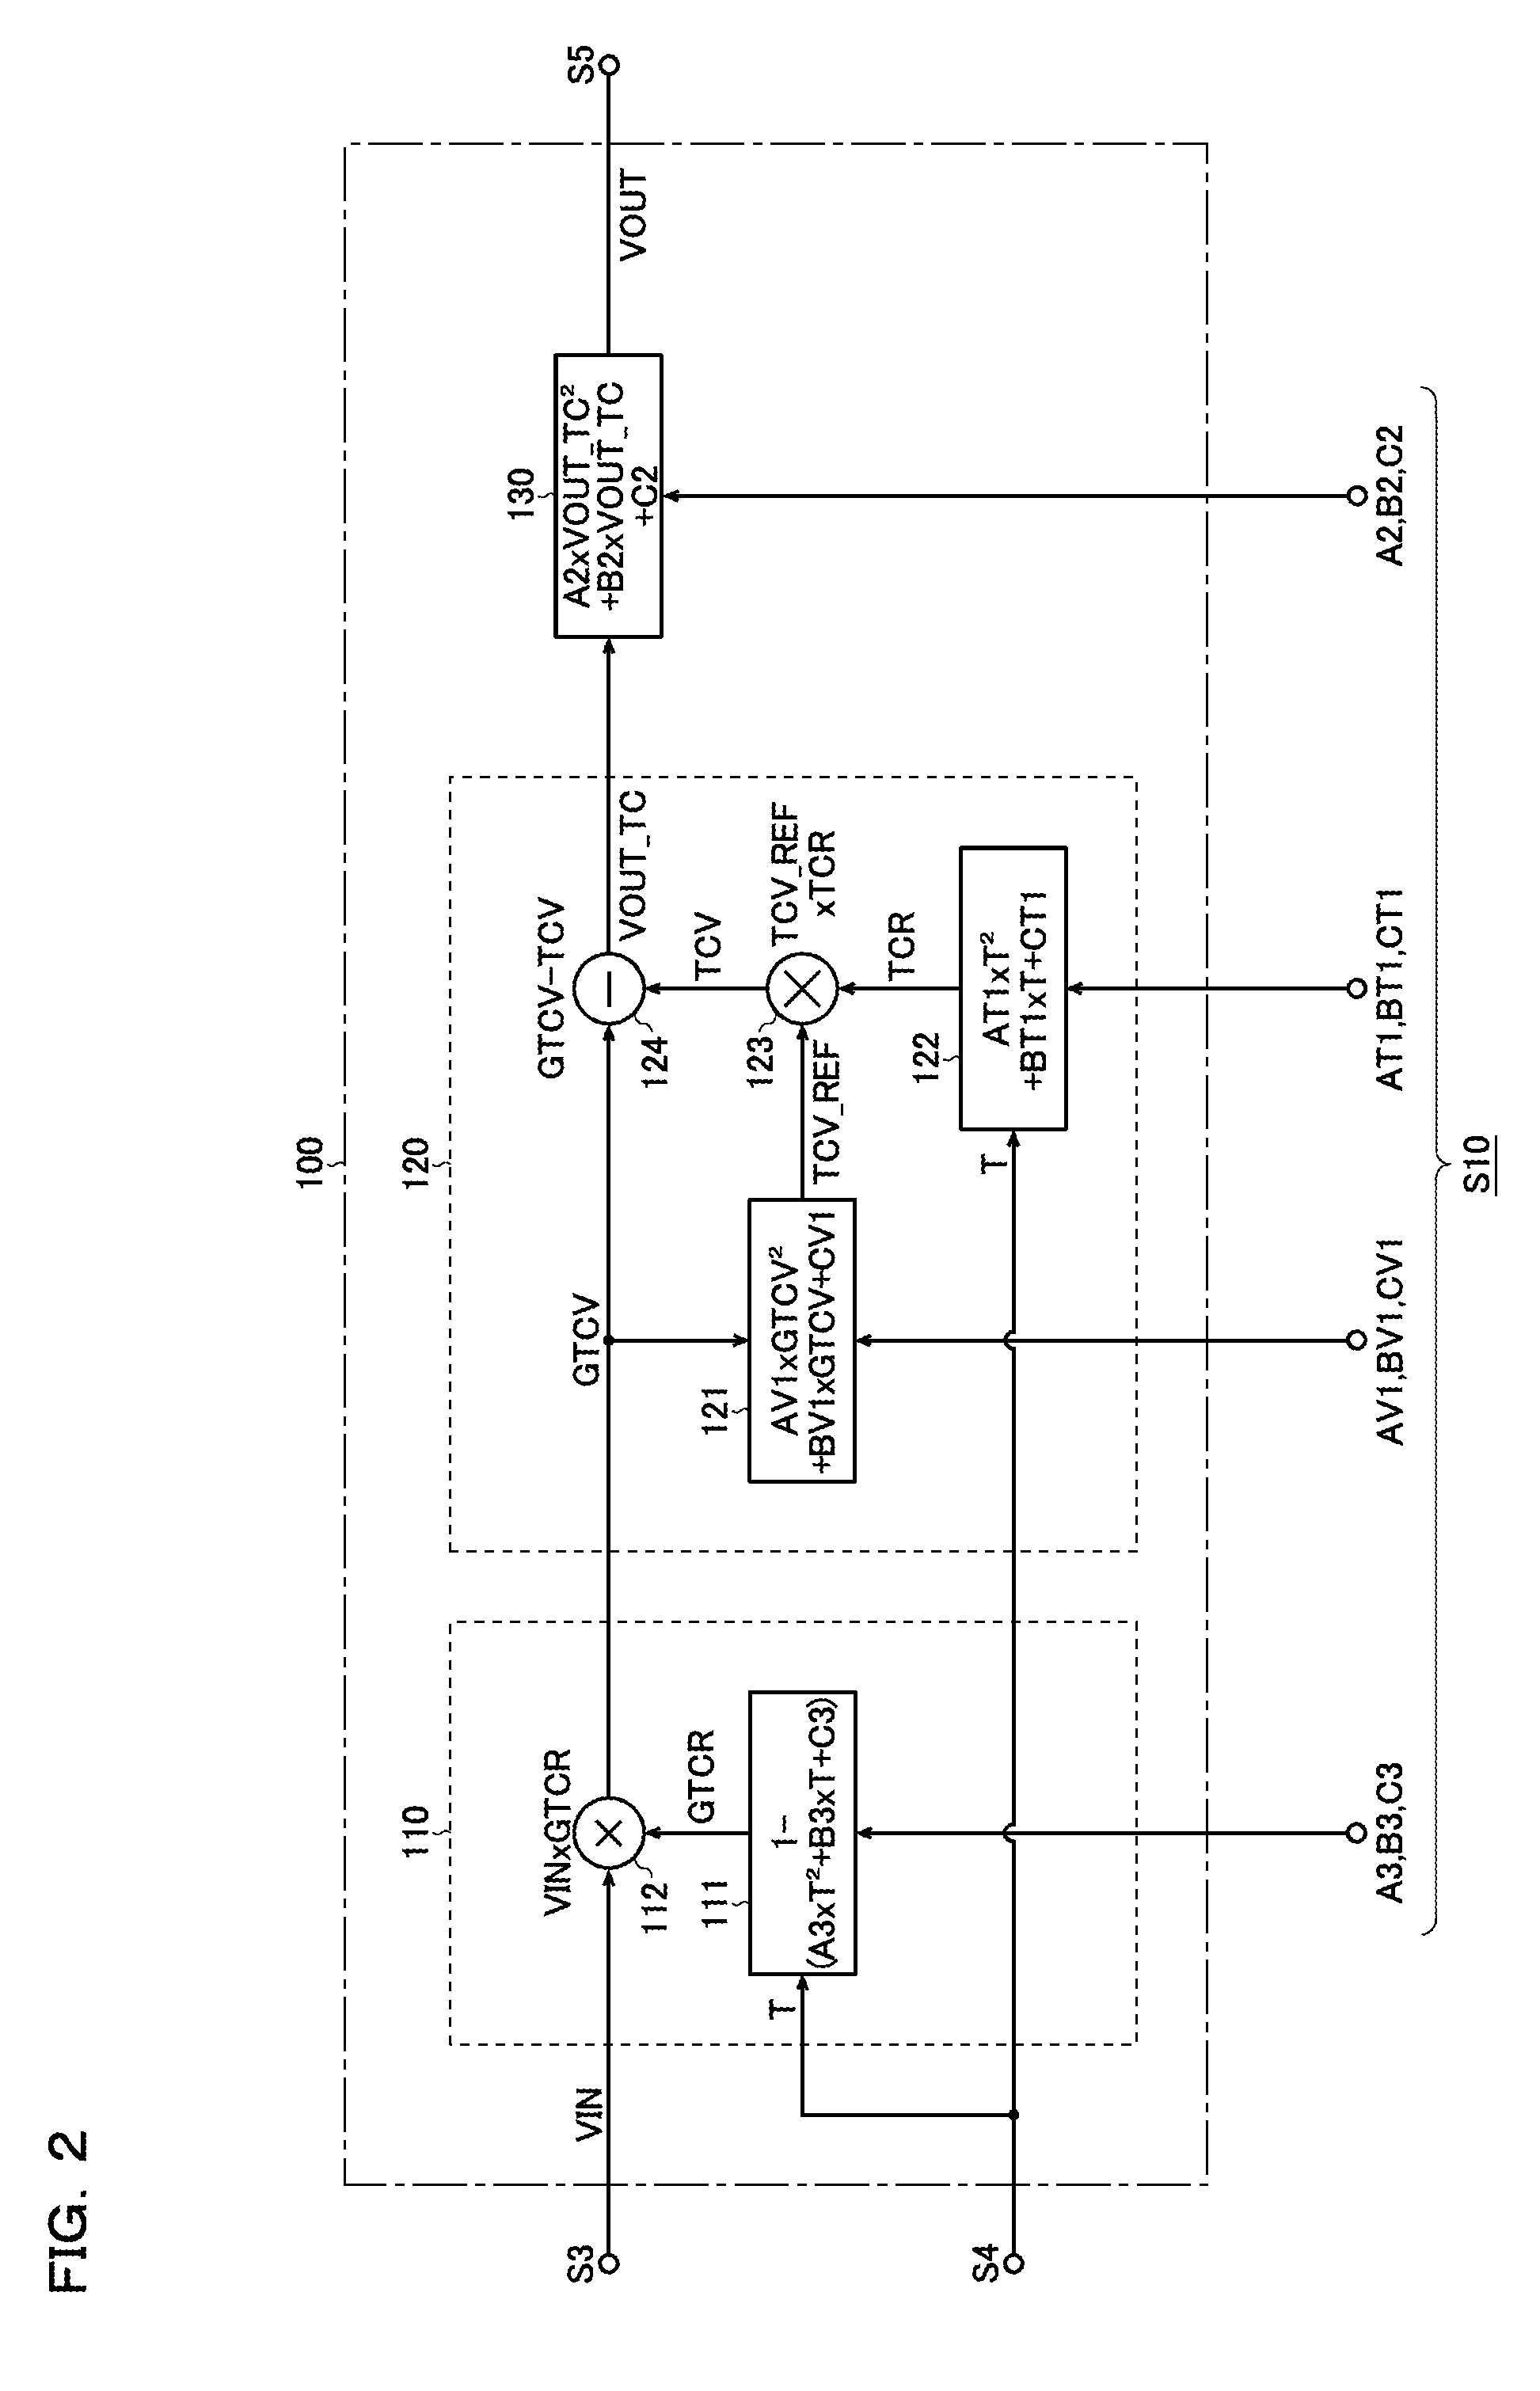 Correction arithmetic circuit and a signal processor